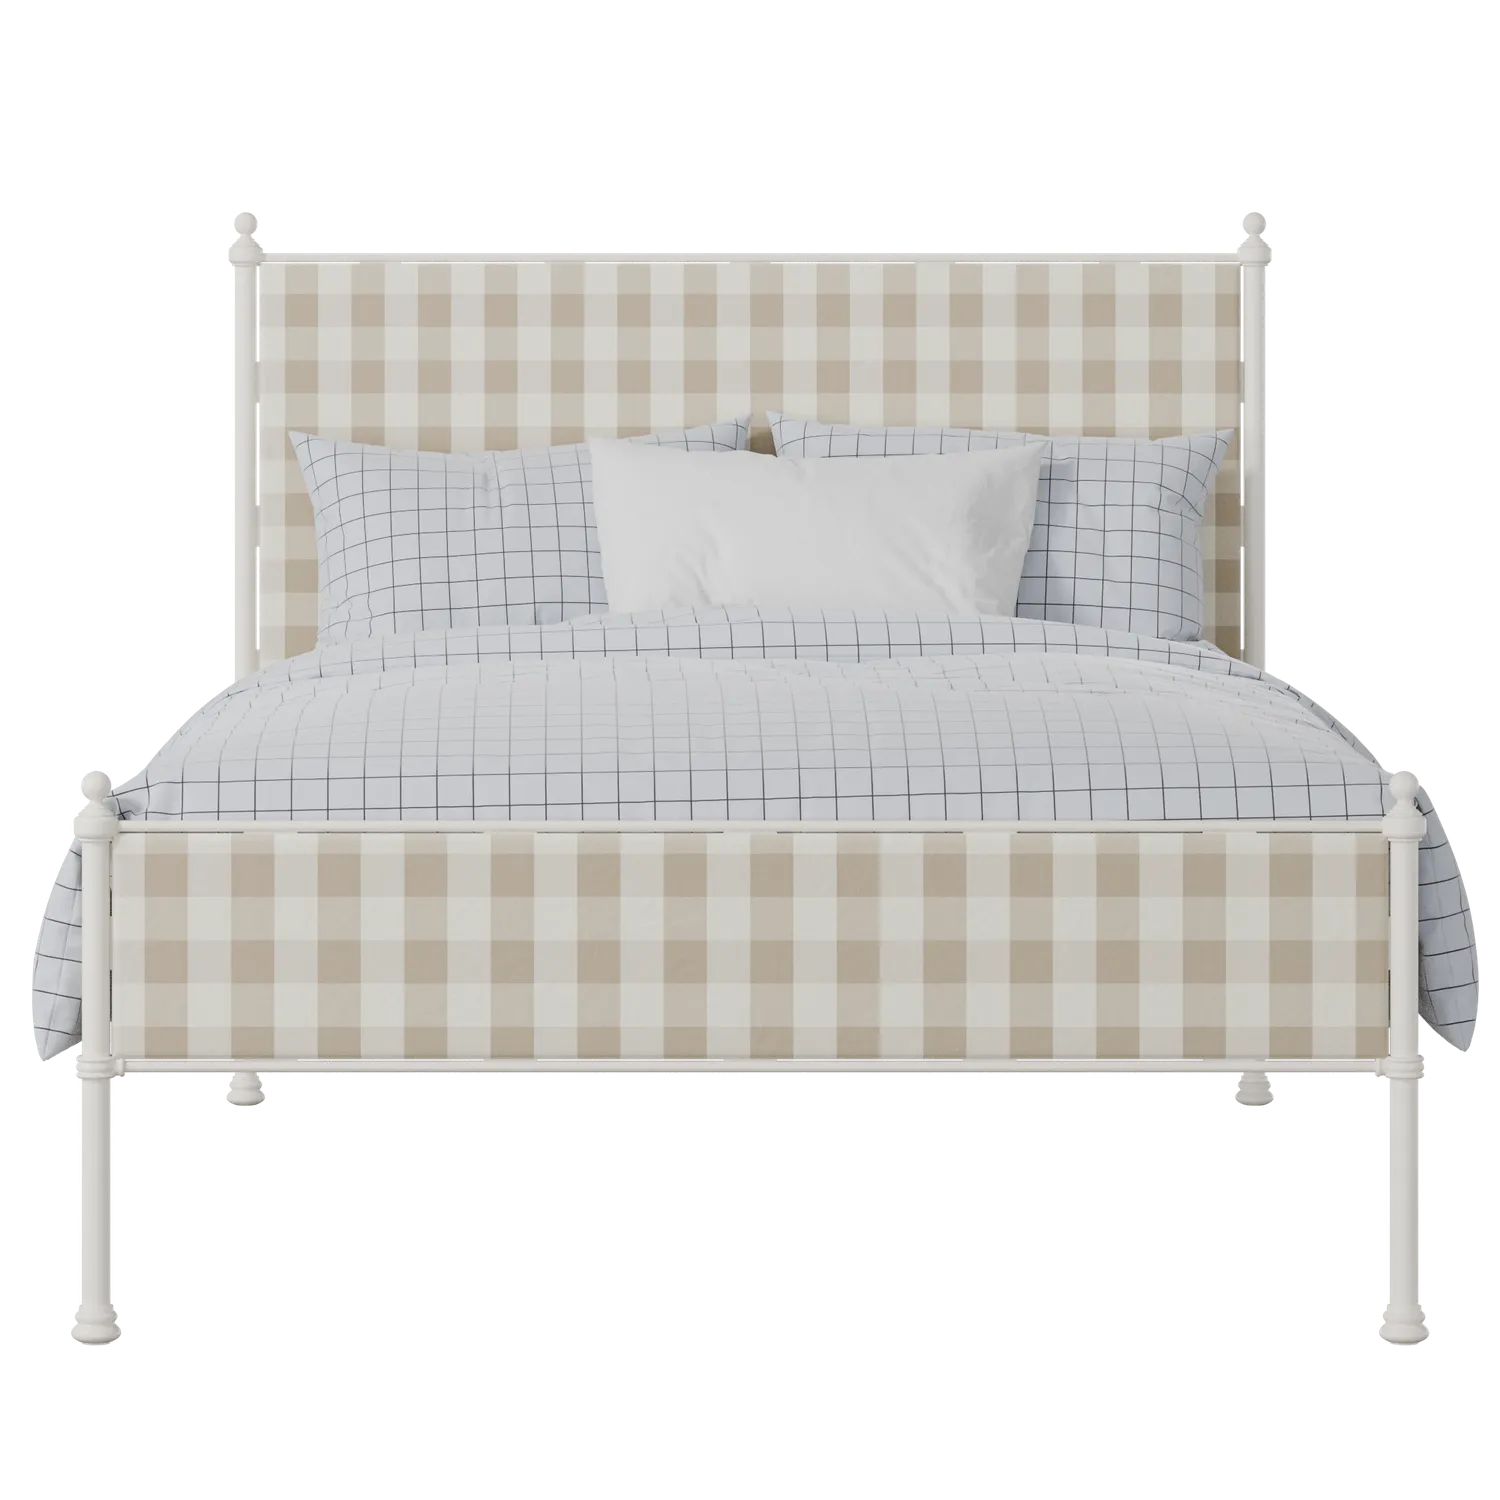 Neville Slim iron/metal upholstered bed in ivory with grey fabric